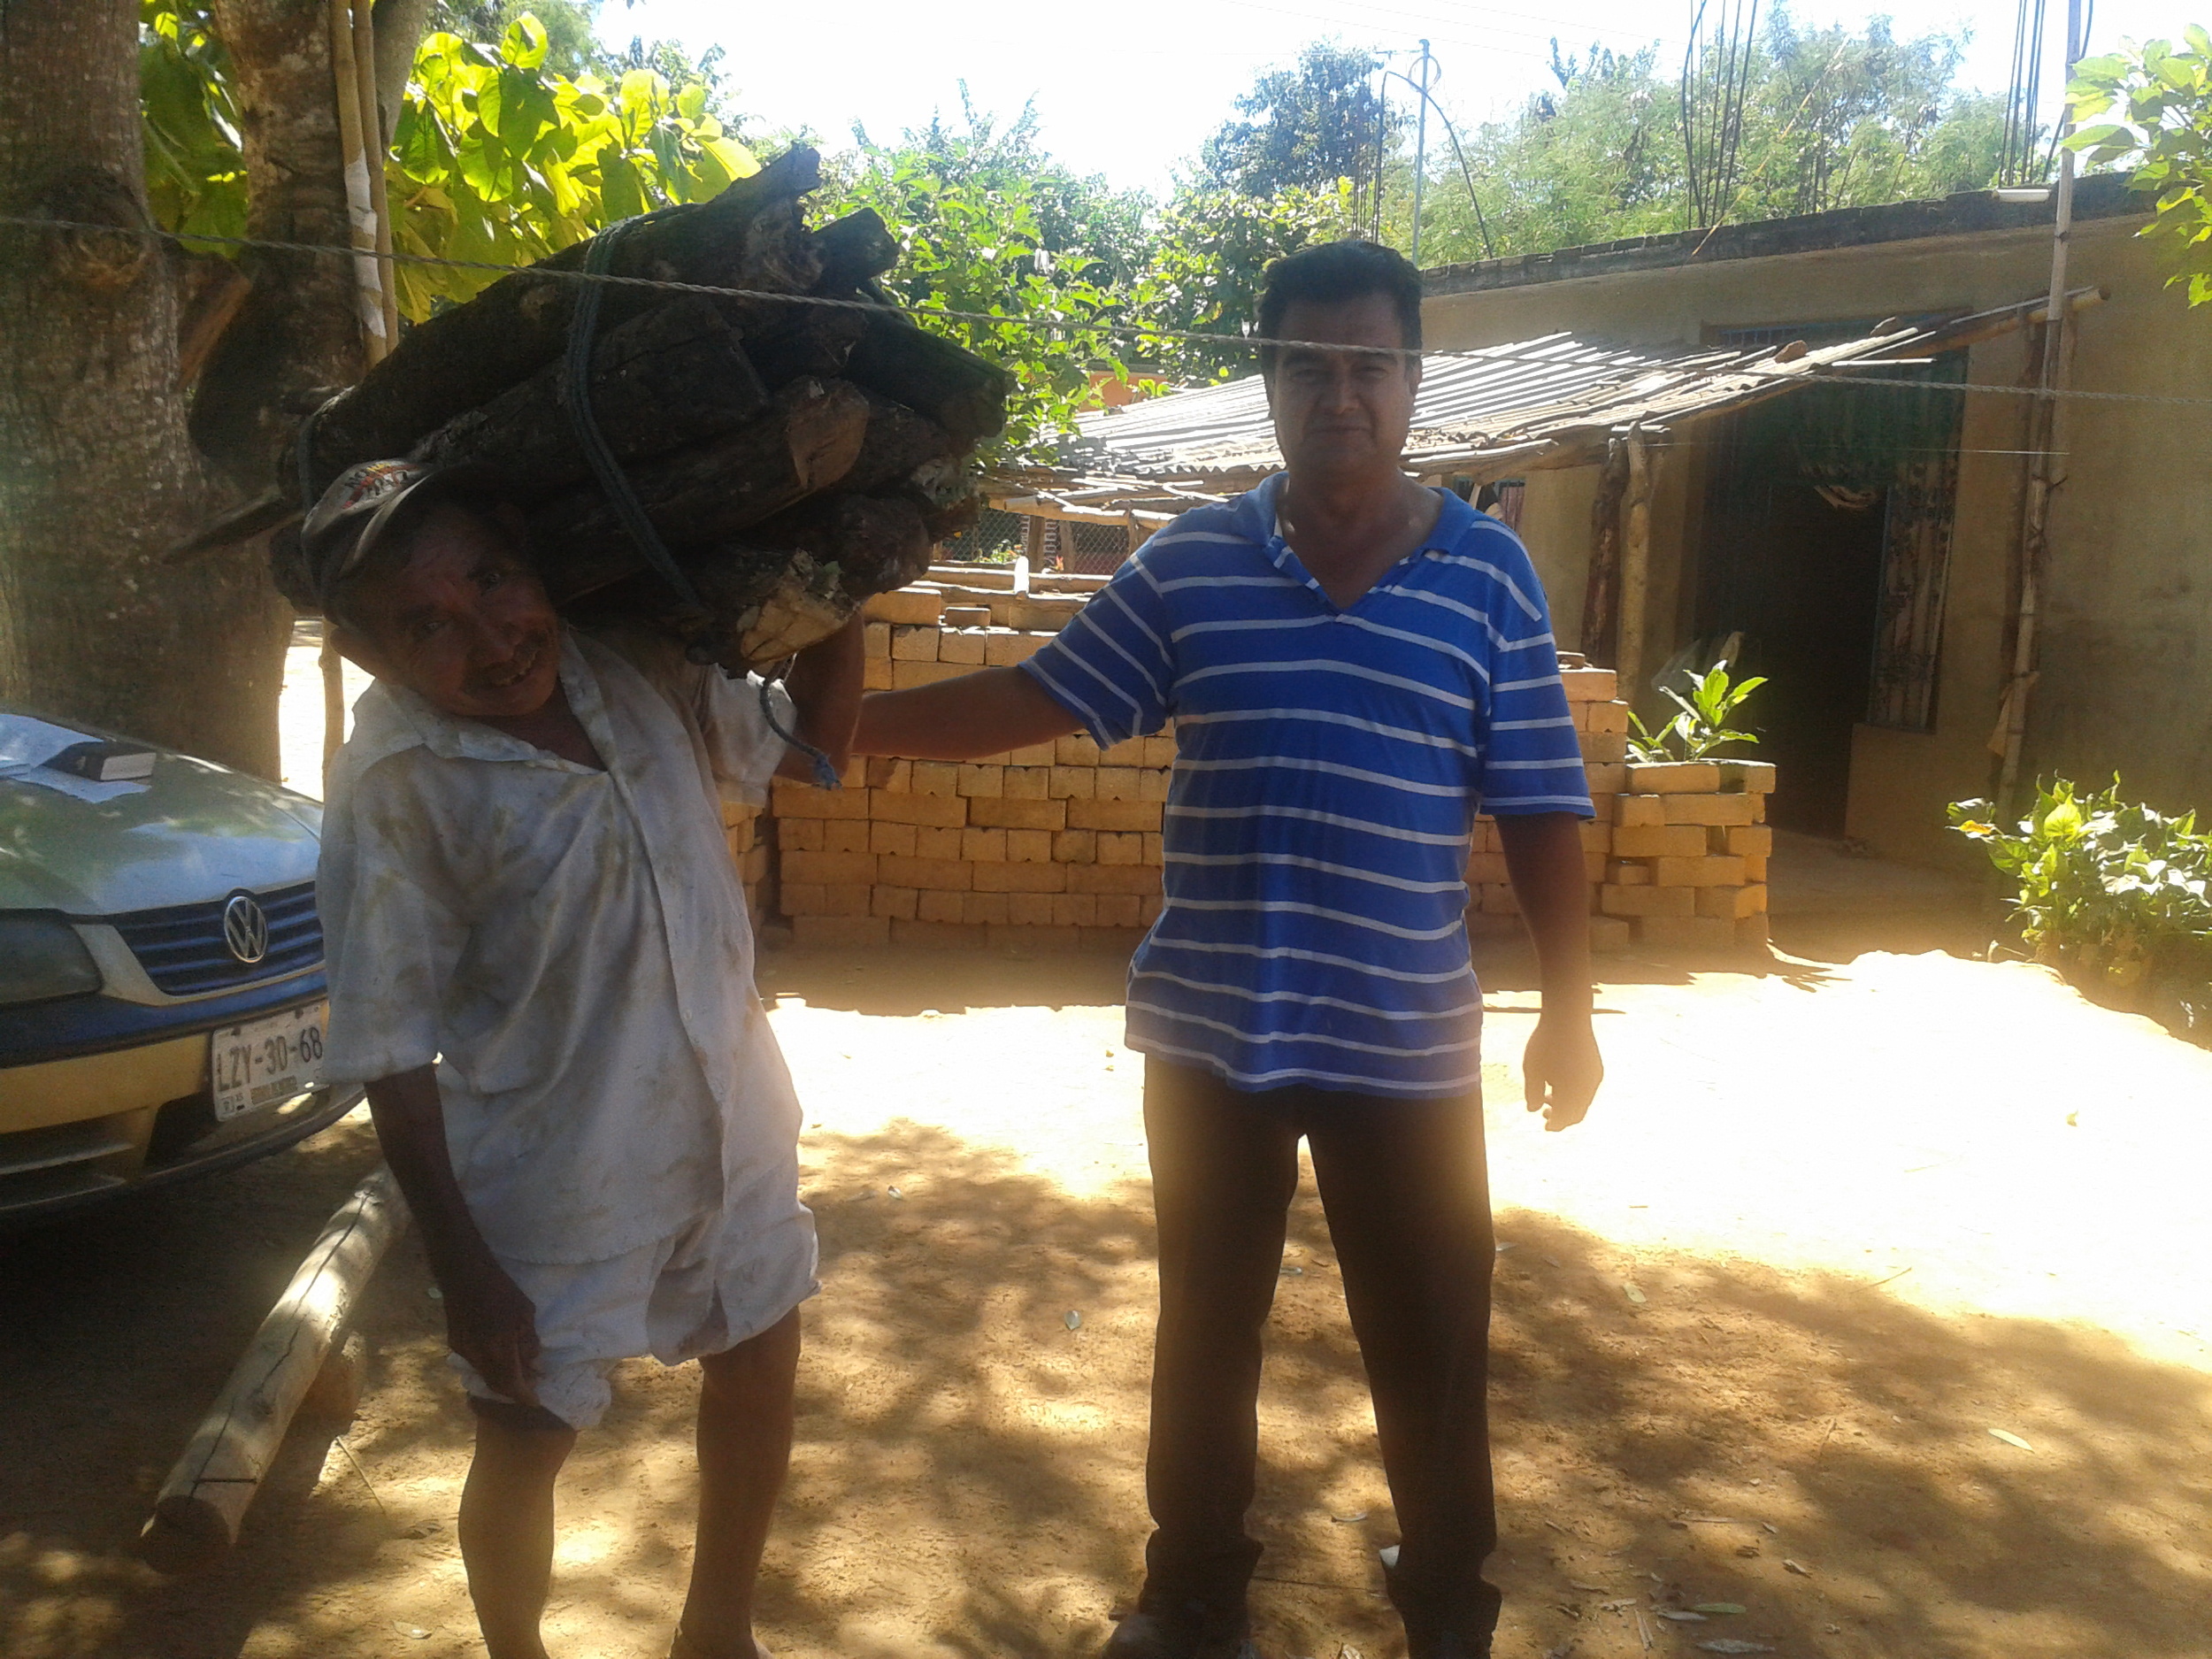  The pastor, in traditional Mixtec breeches and shirt, with Norberto, carrying firewood for cooking fires 